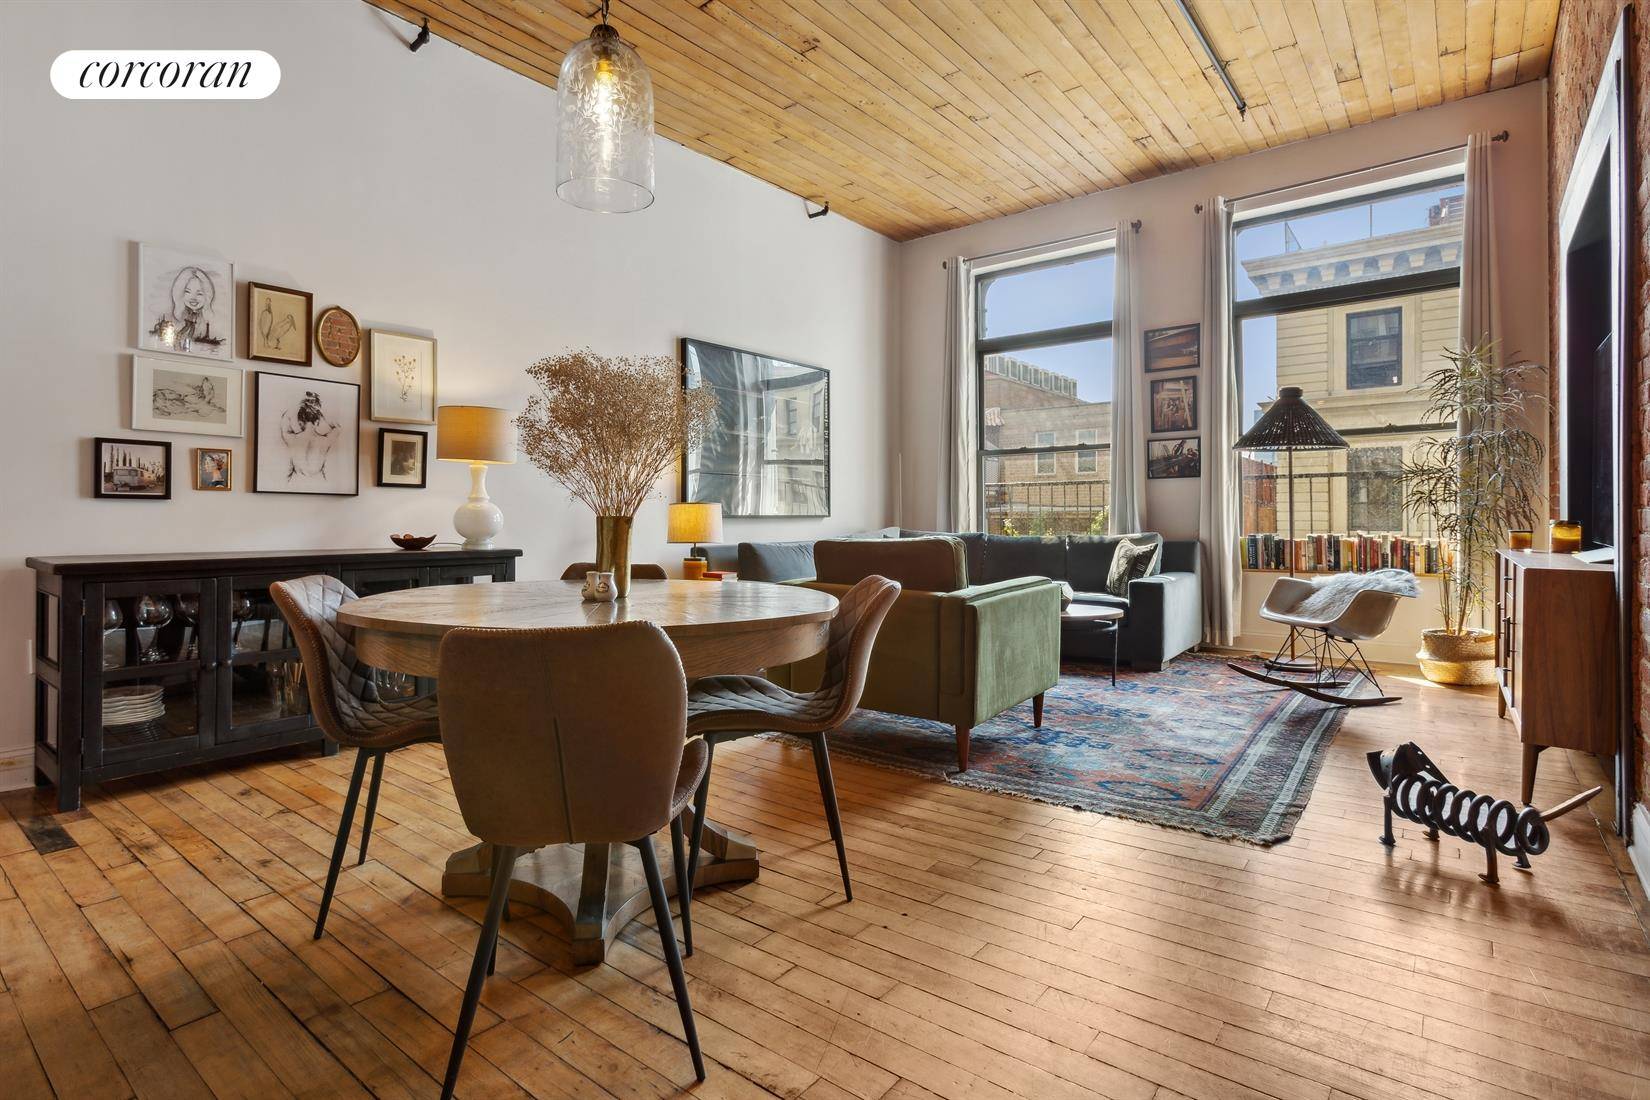 PRICE DROP ! At almost 1, 000 square feet, this massive sun drenched one bedroom condo loft at 138 Broadway, 4C is ready to be your next home.